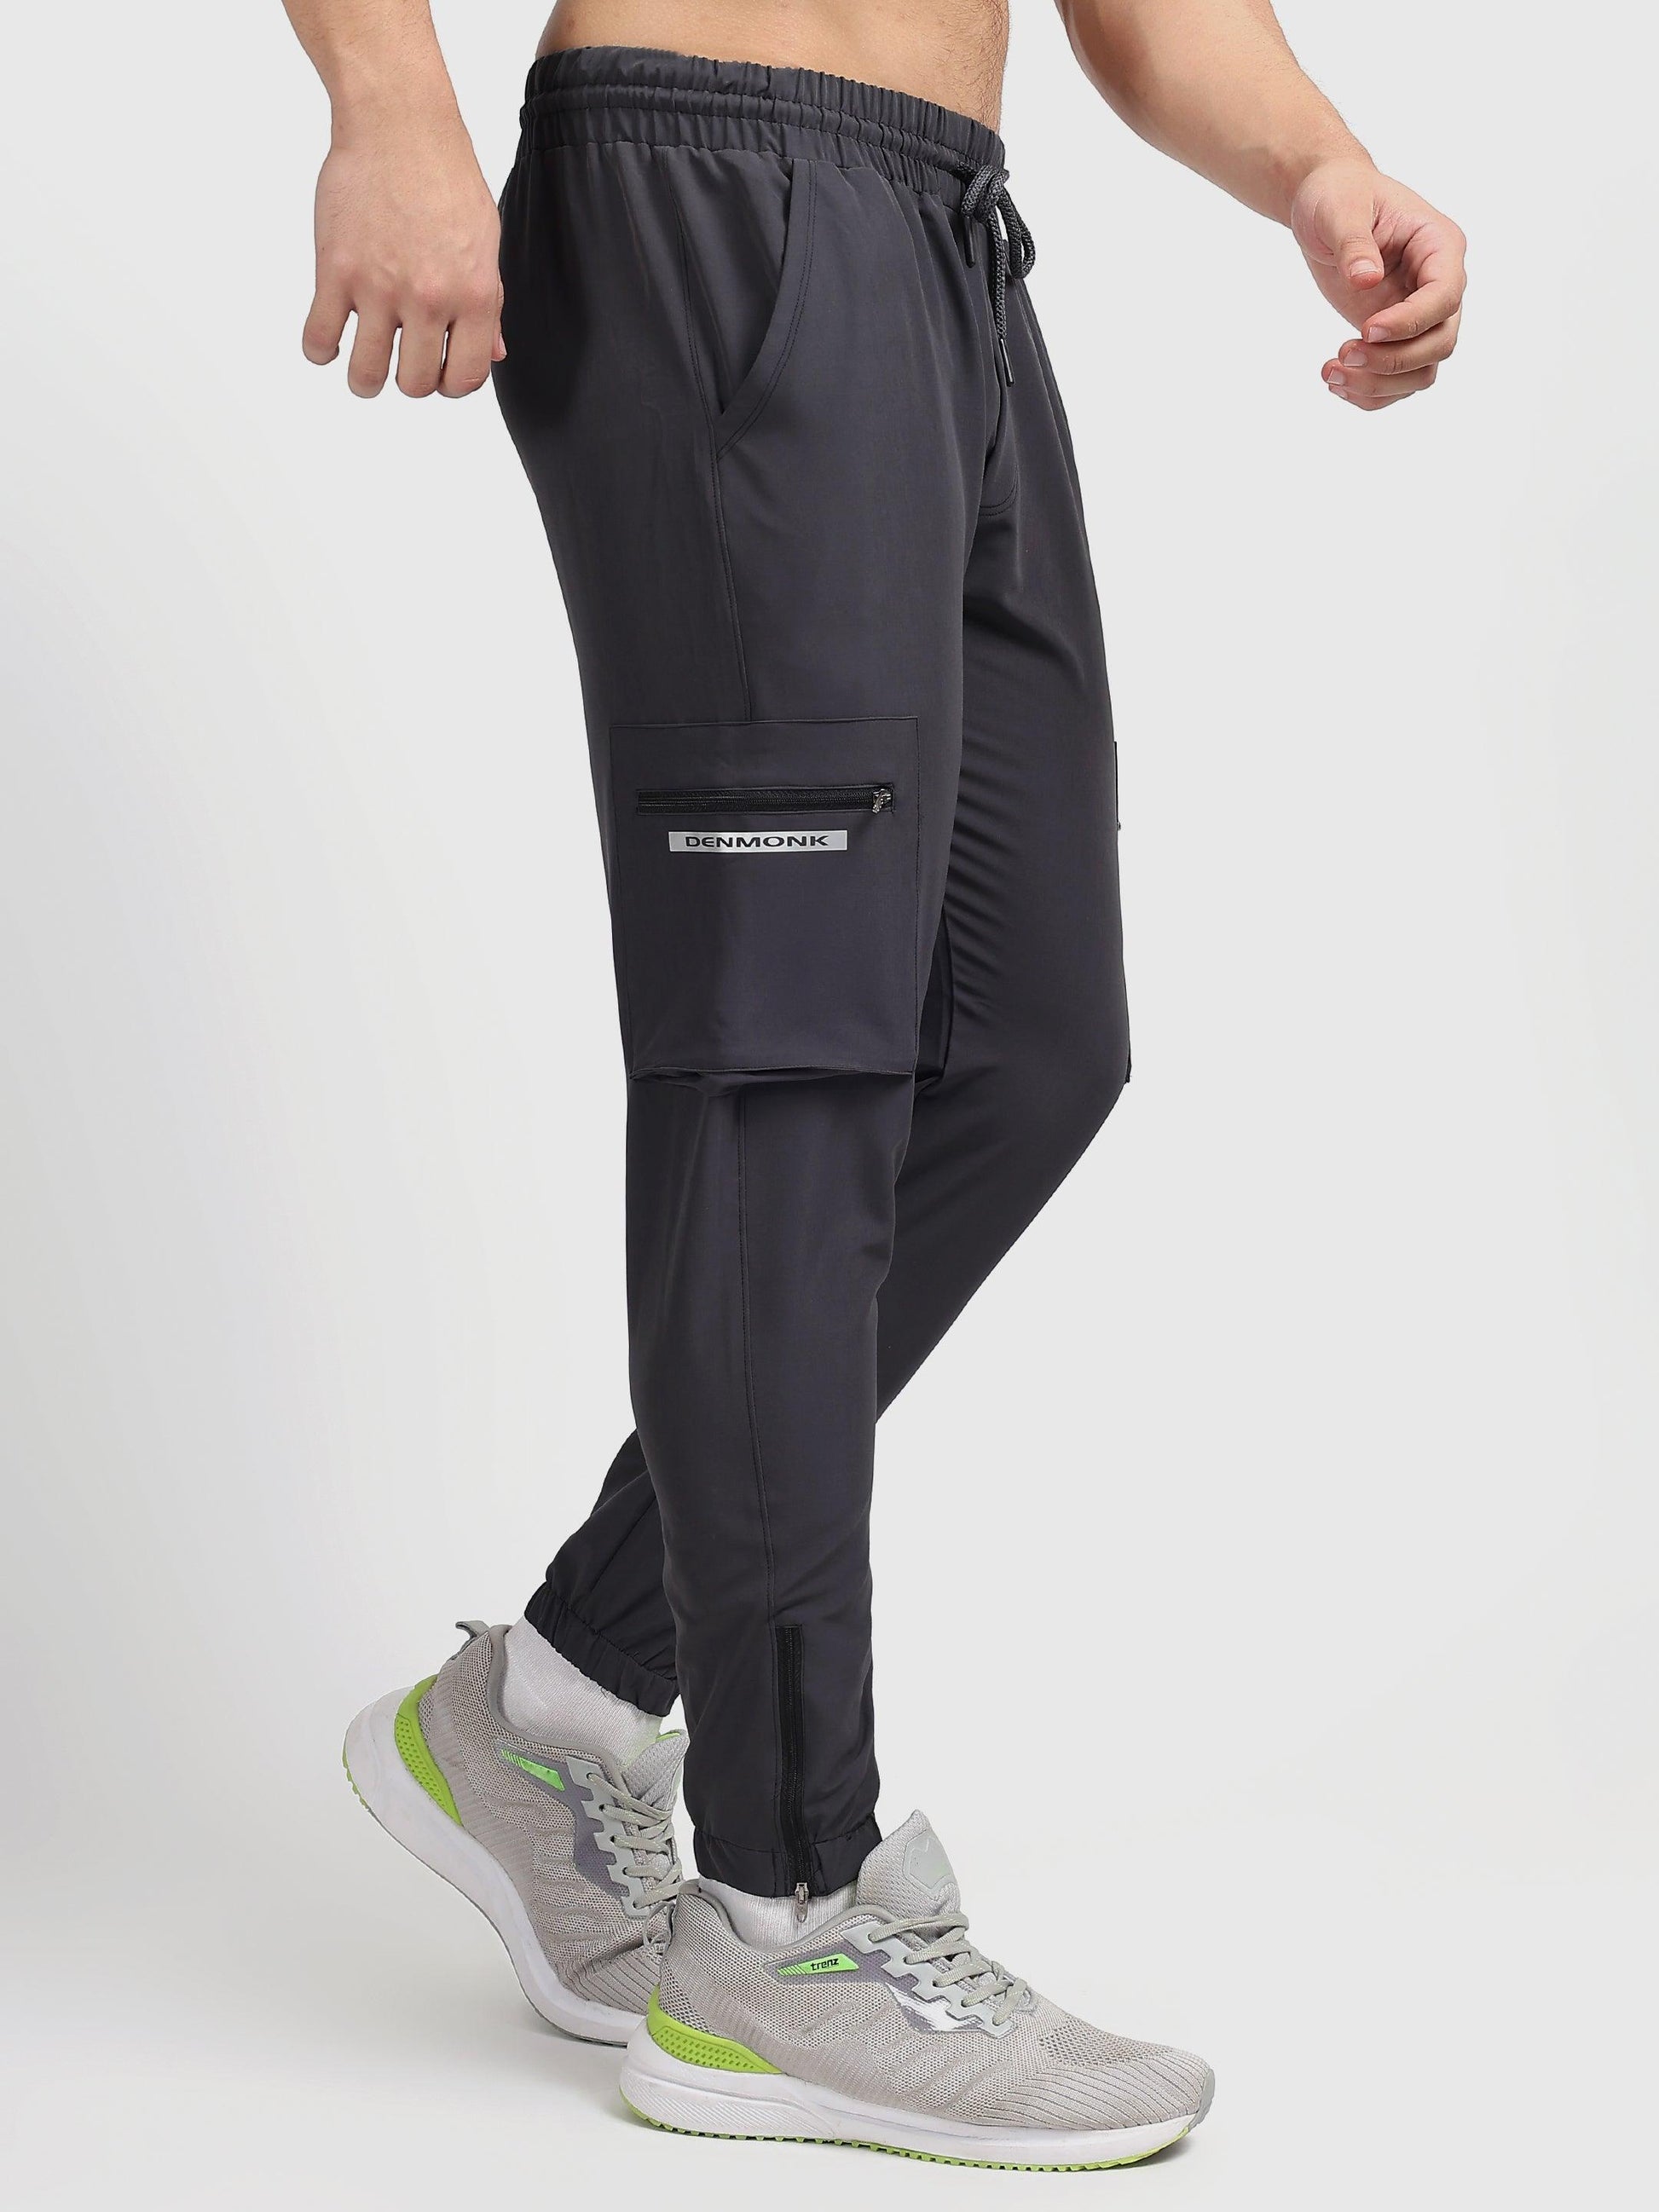 Denmonk: Elevate your look with these Trekcrago sharp charcoal Trackpant for mens.